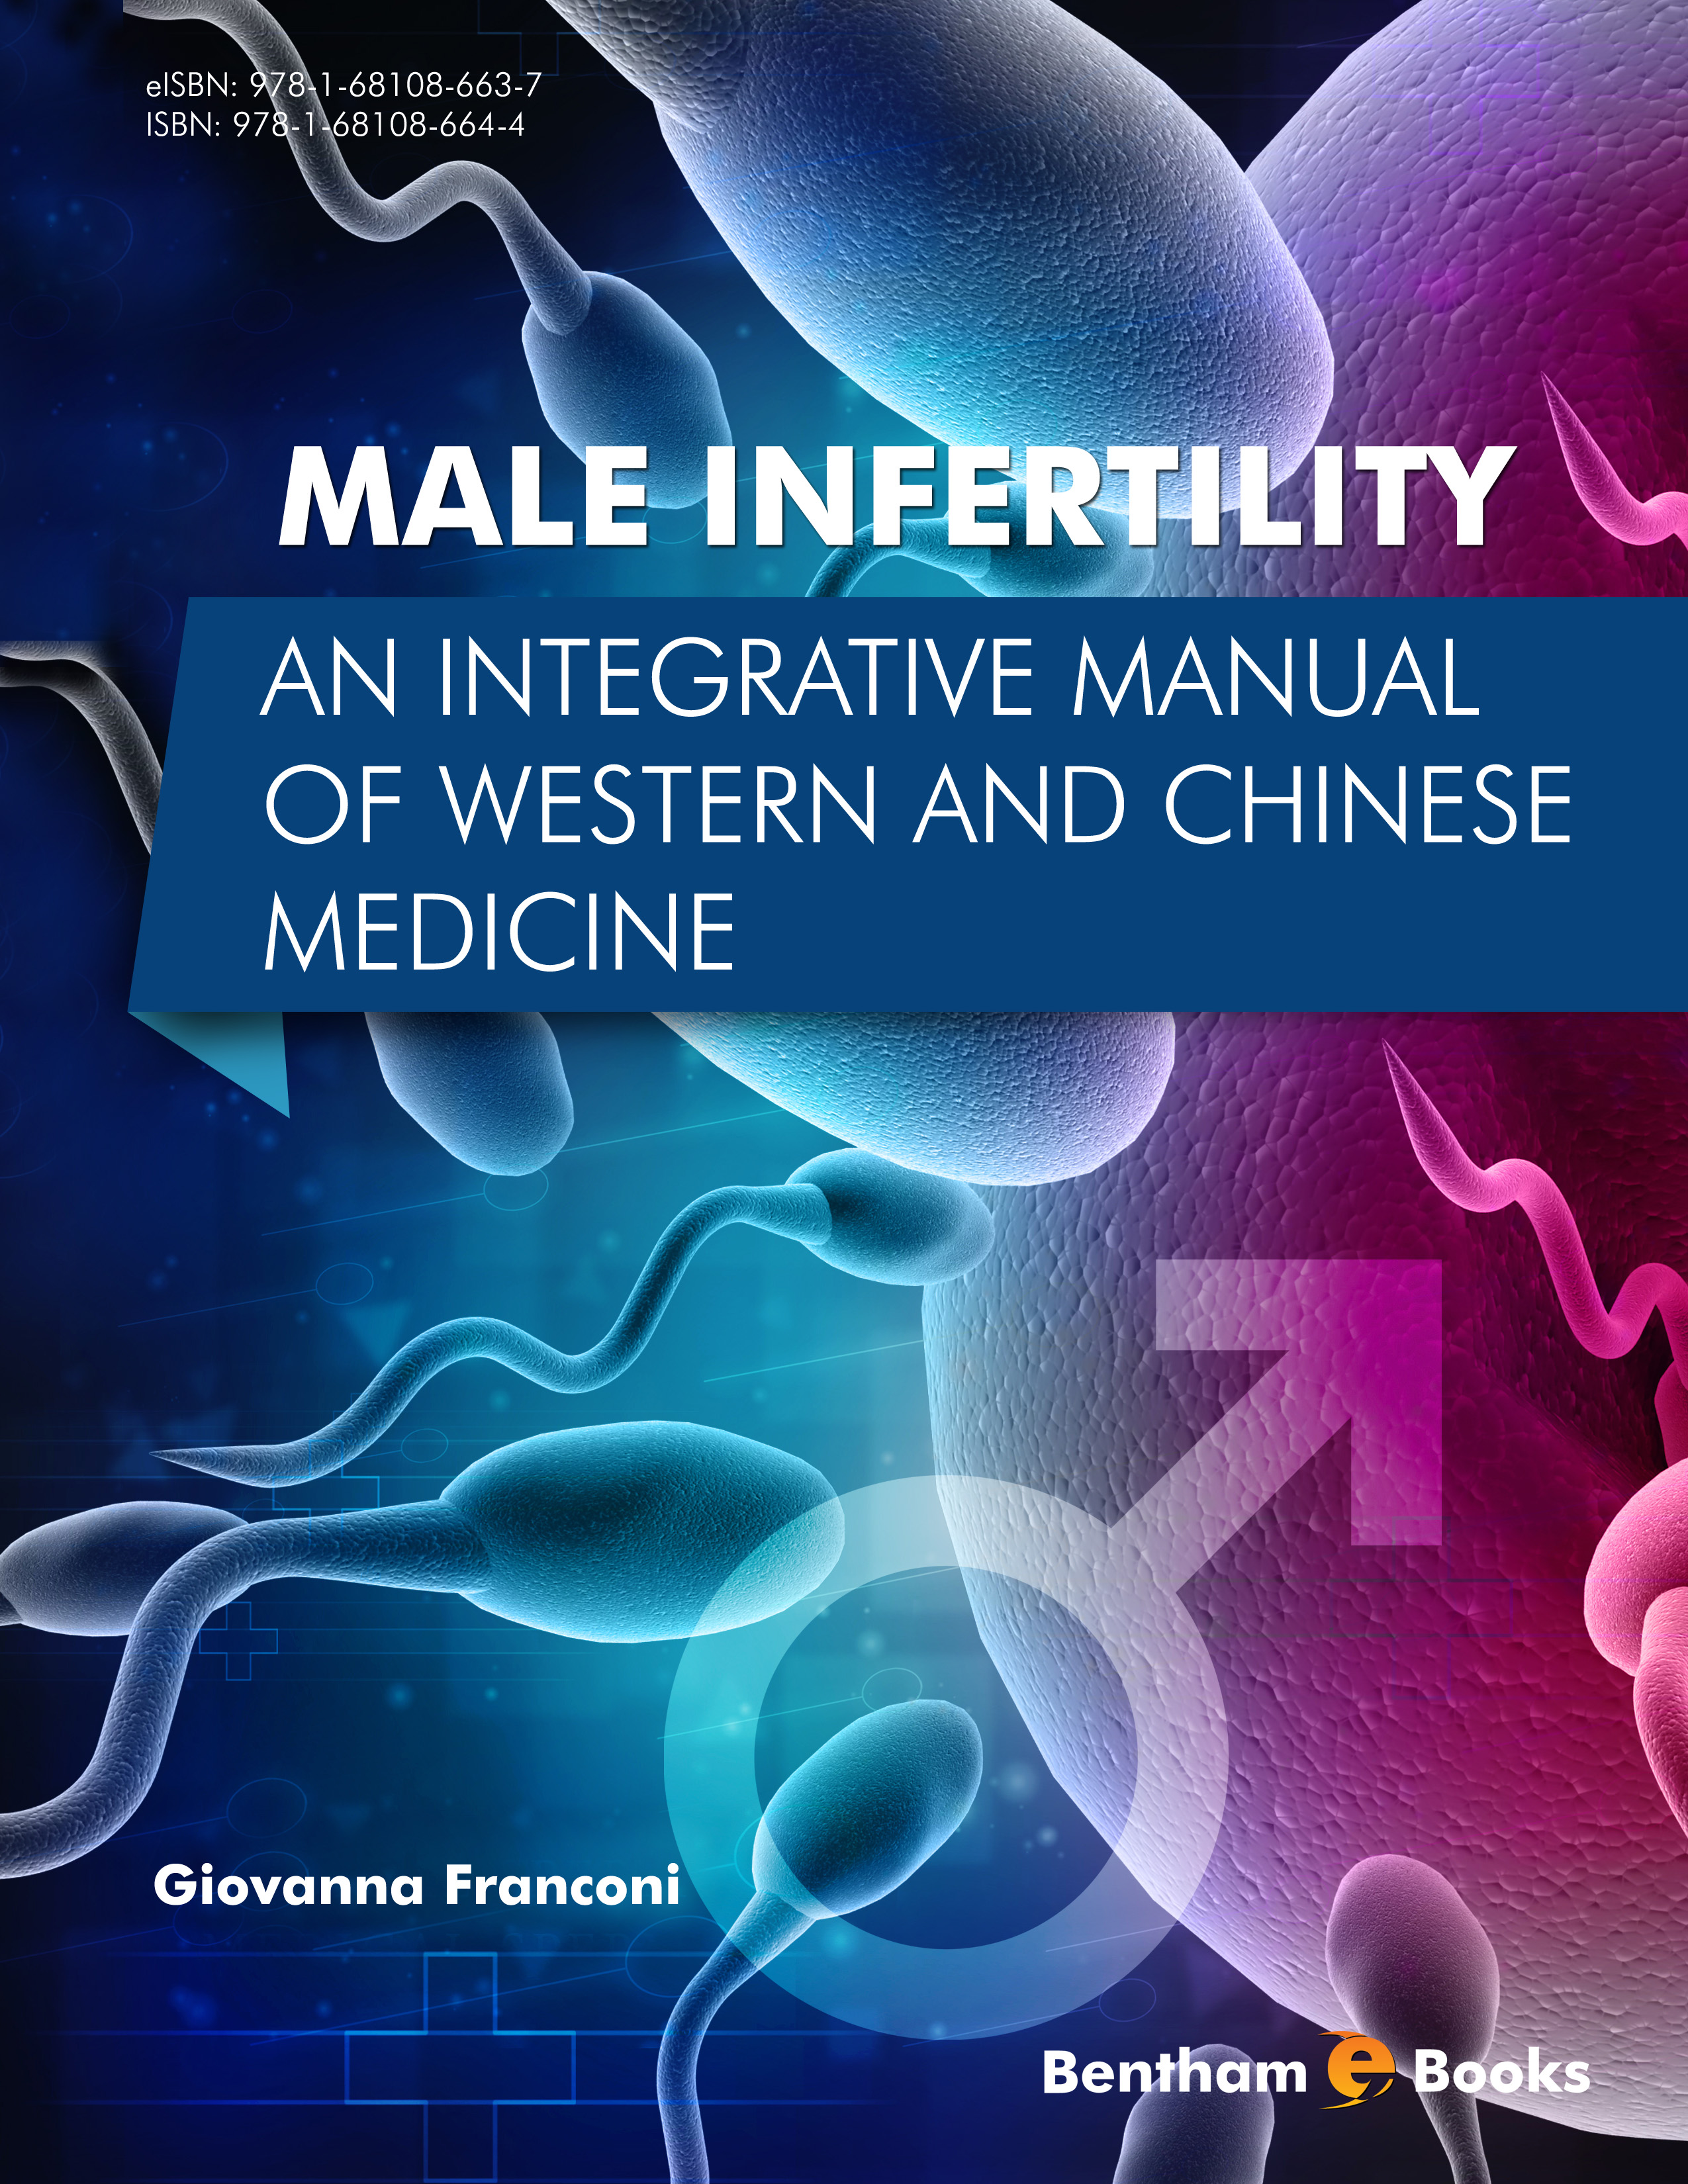 Male Infertility: An Integrative Manual of Western and Chinese Medicine